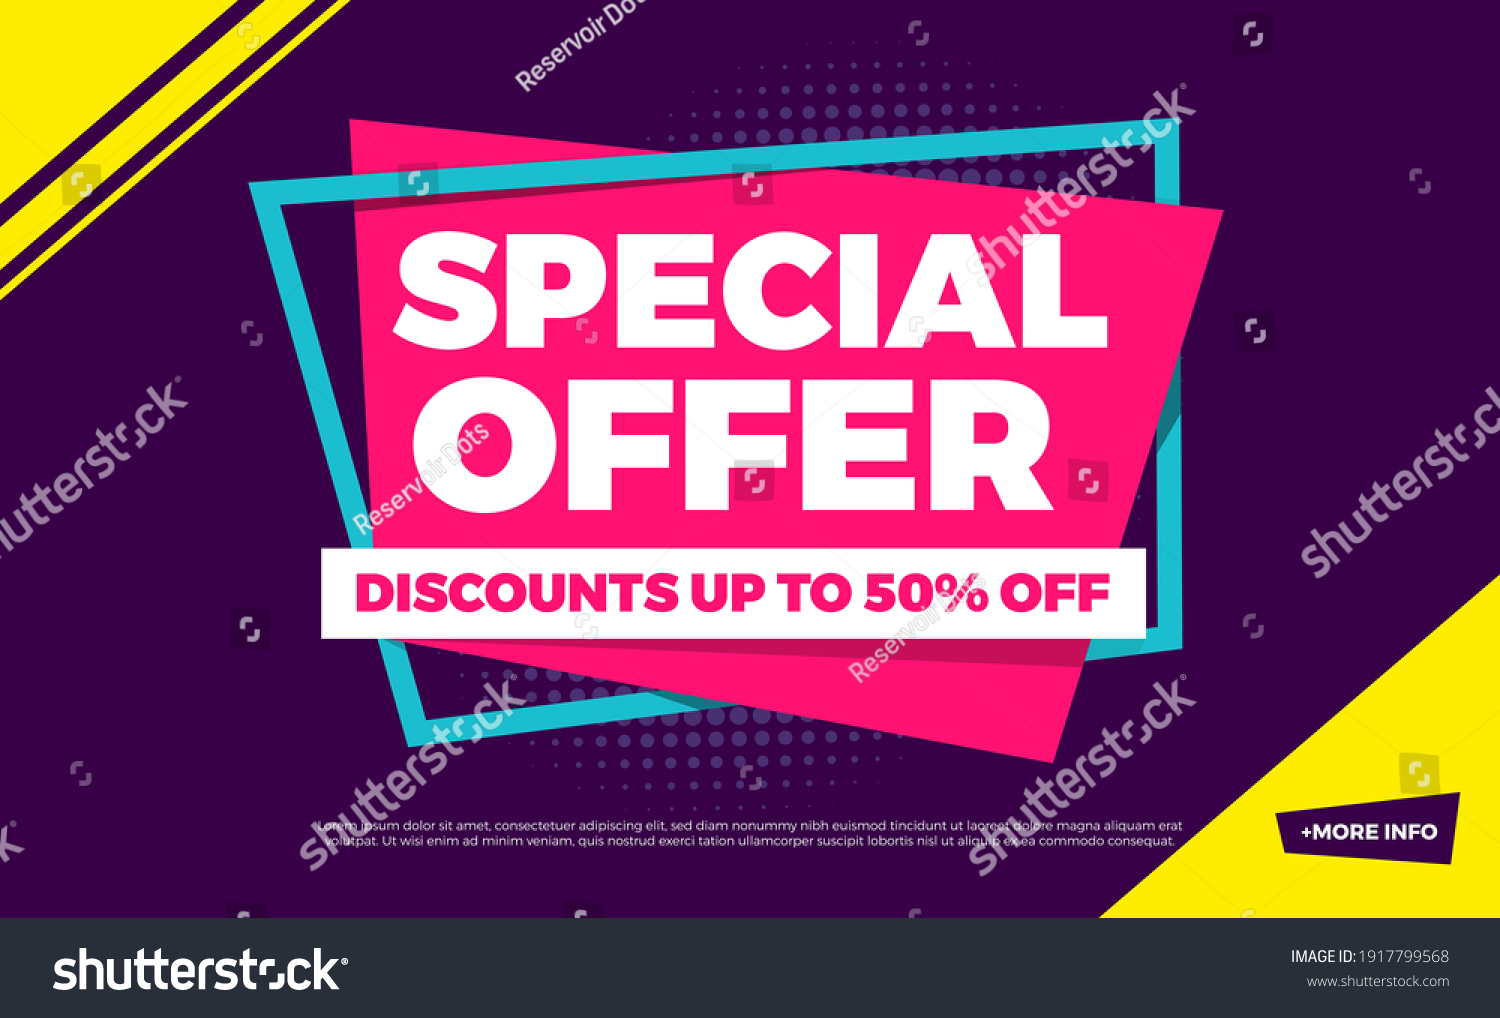 special-offer-discounts-50-off-shopping-stock-vector-royalty-free